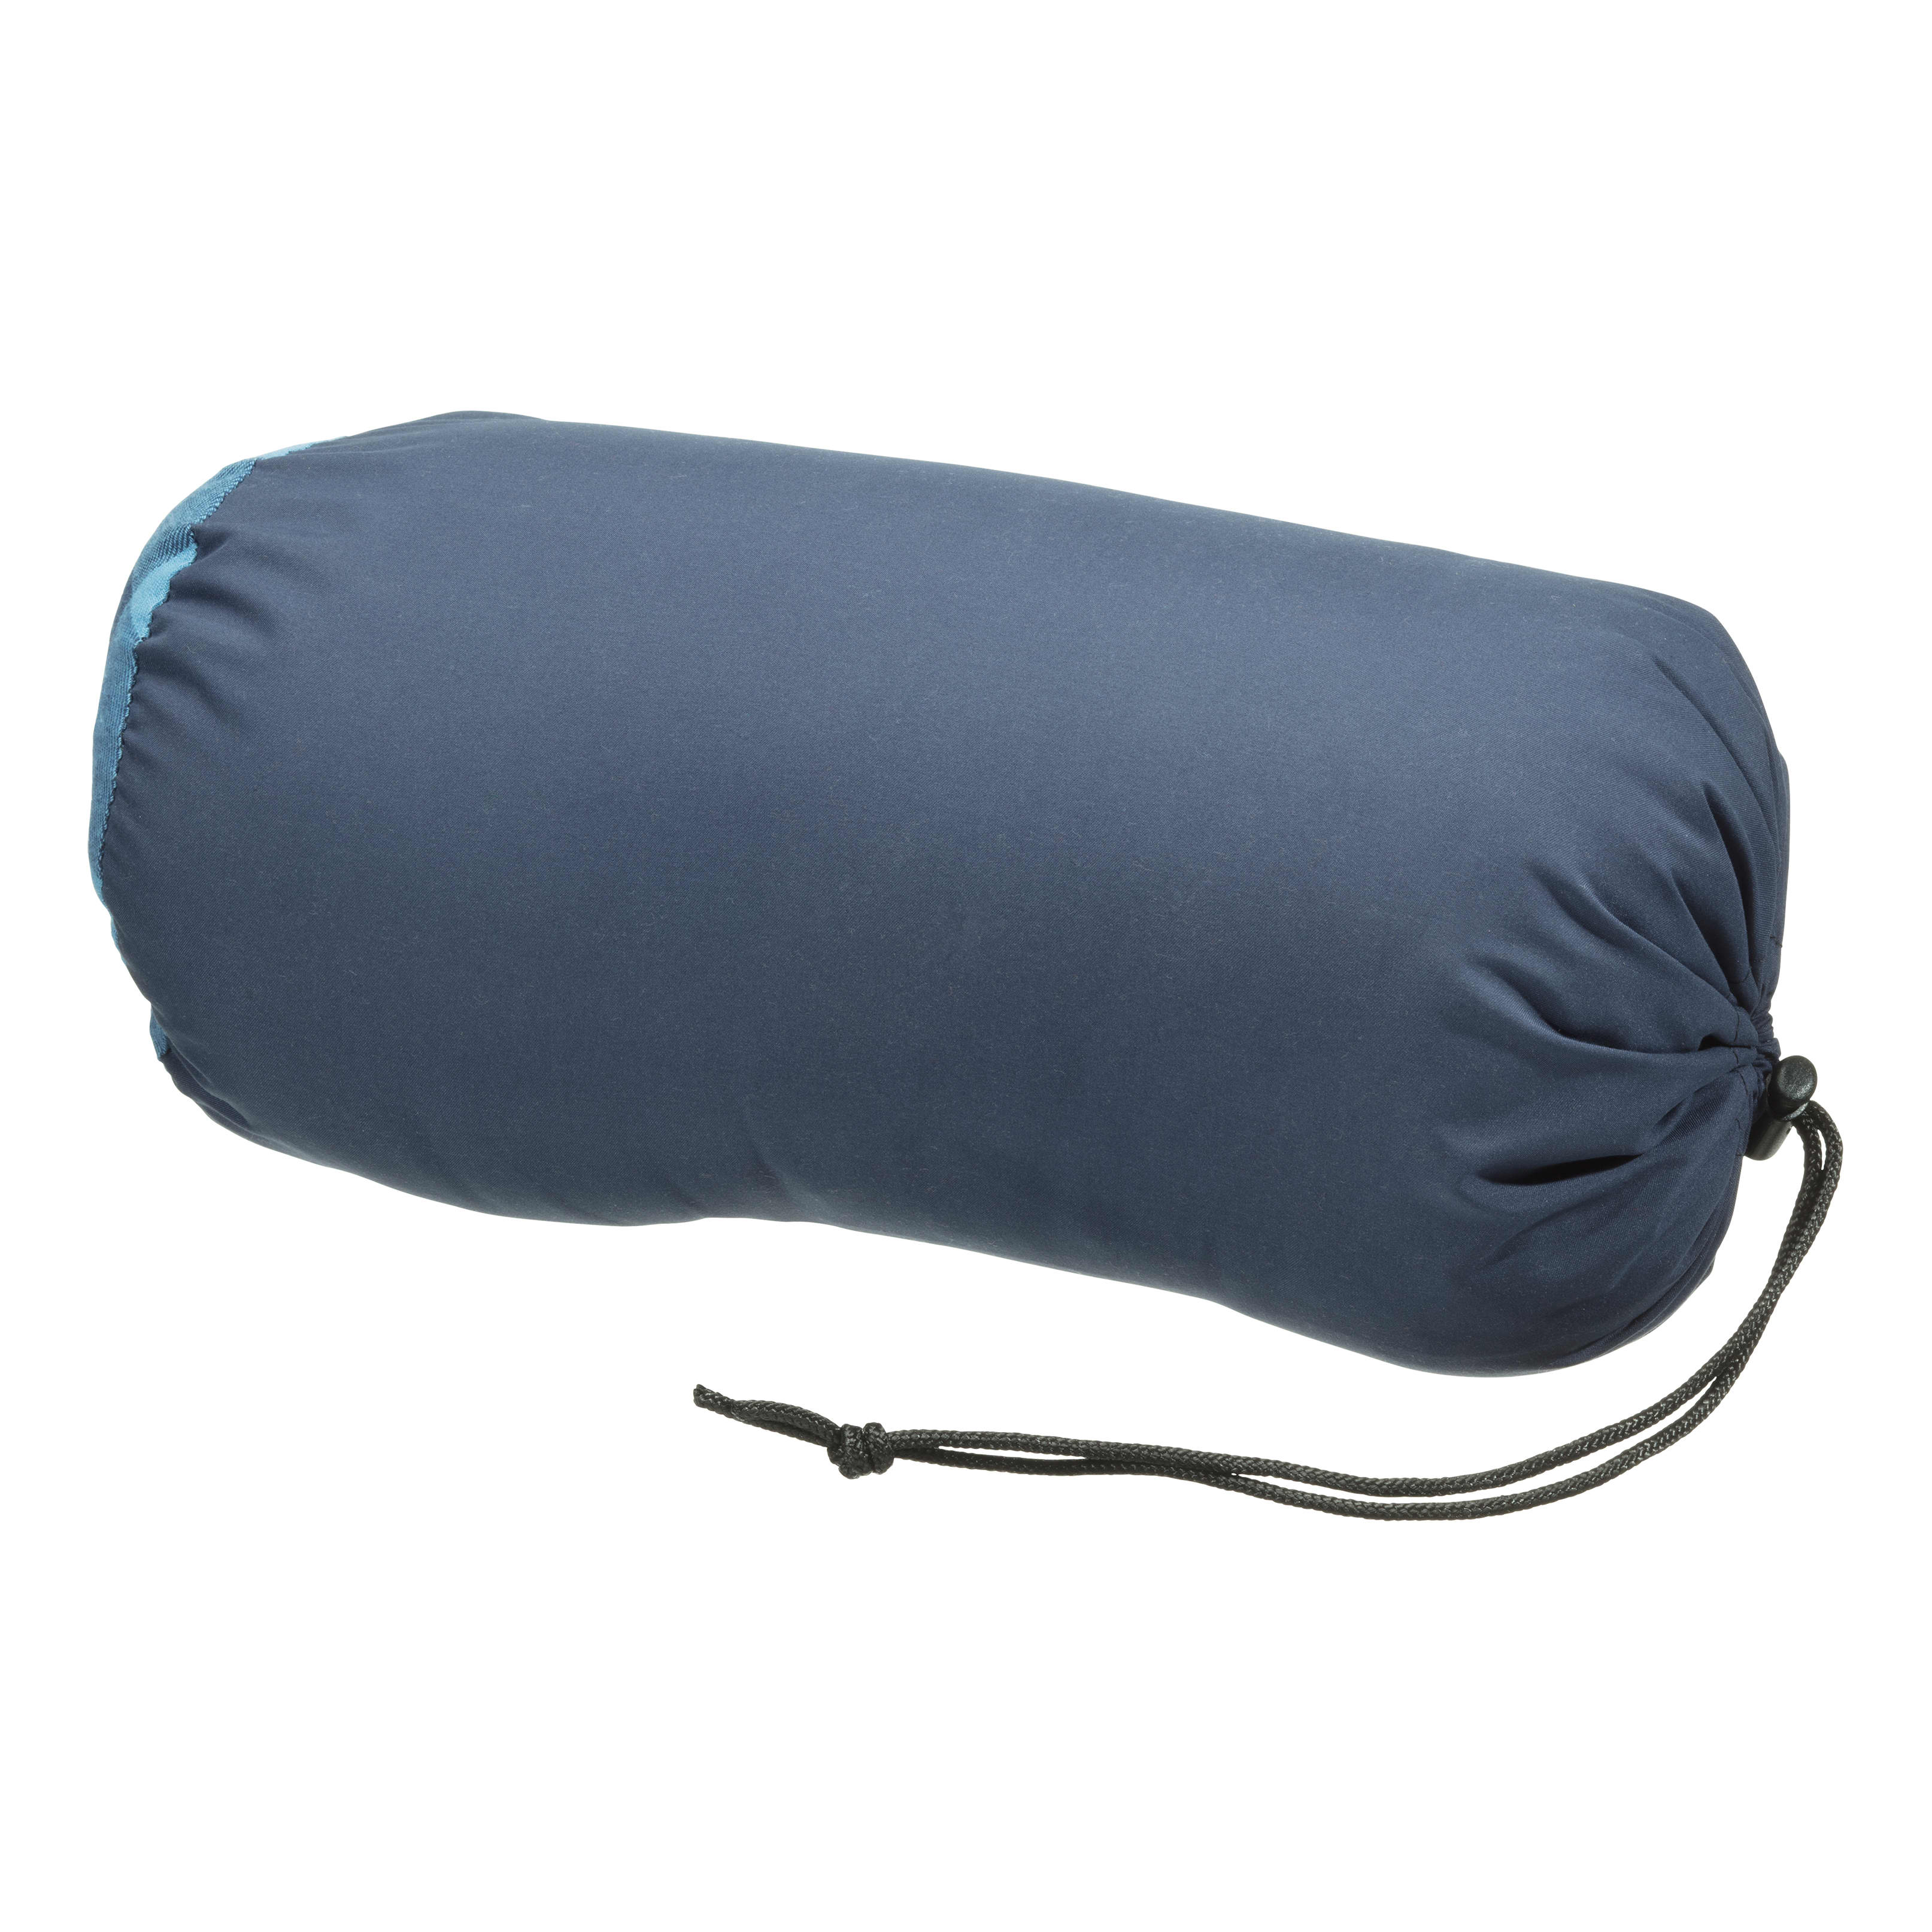 Bass Pro Shops® Eclipse™ Deluxe Camp Pillow - Peacoat Navy - Stuff Sack